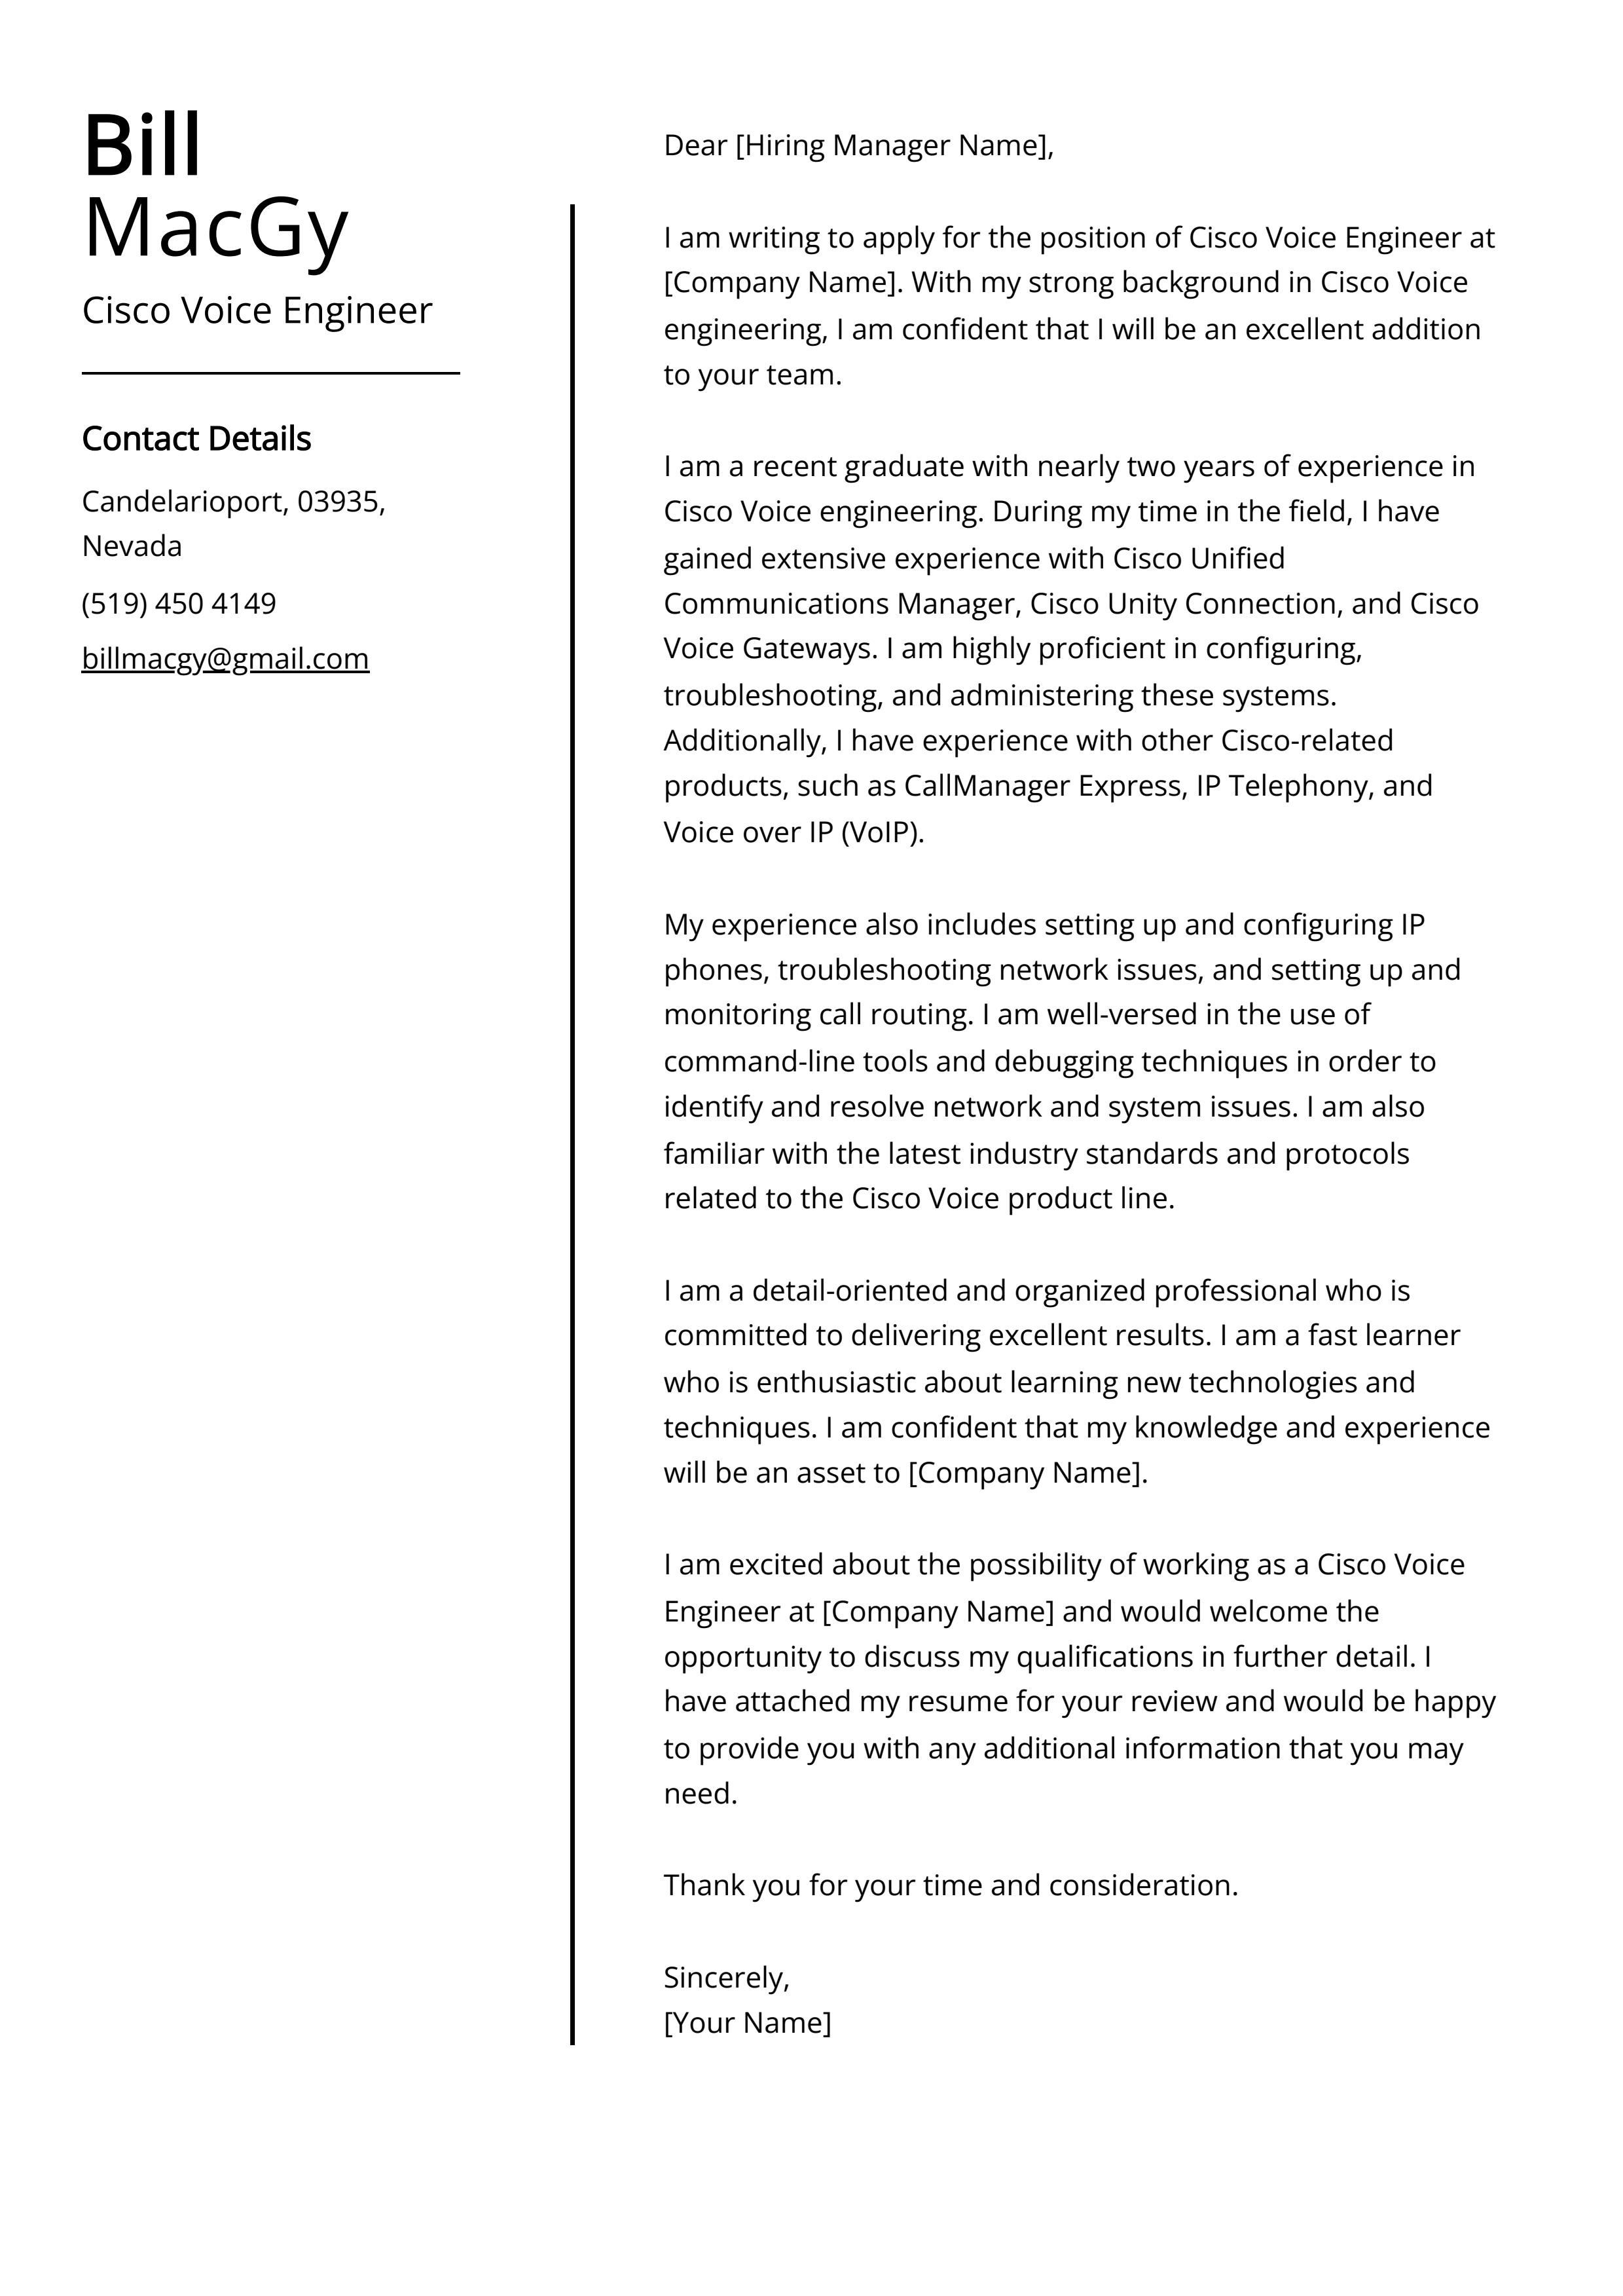 Cisco Voice Engineer Cover Letter Example